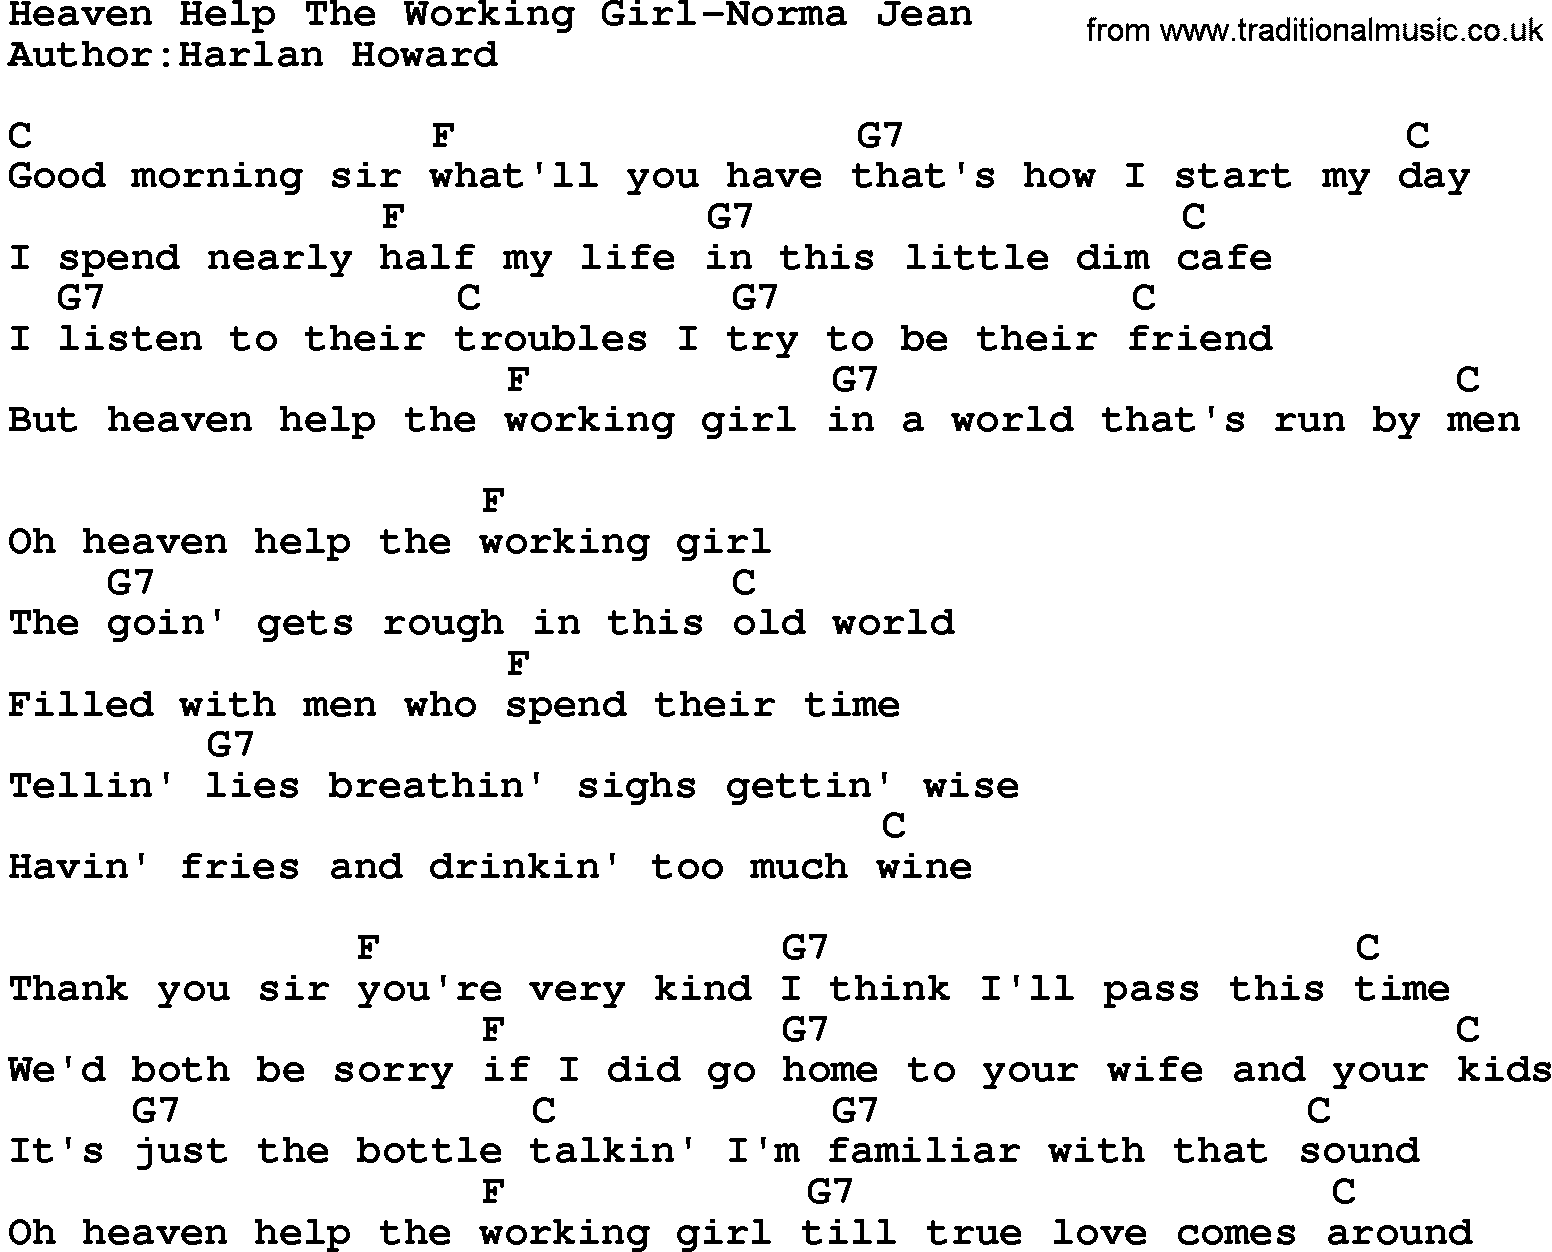 Country music song: Heaven Help The Working Girl-Norma Jean lyrics and chords